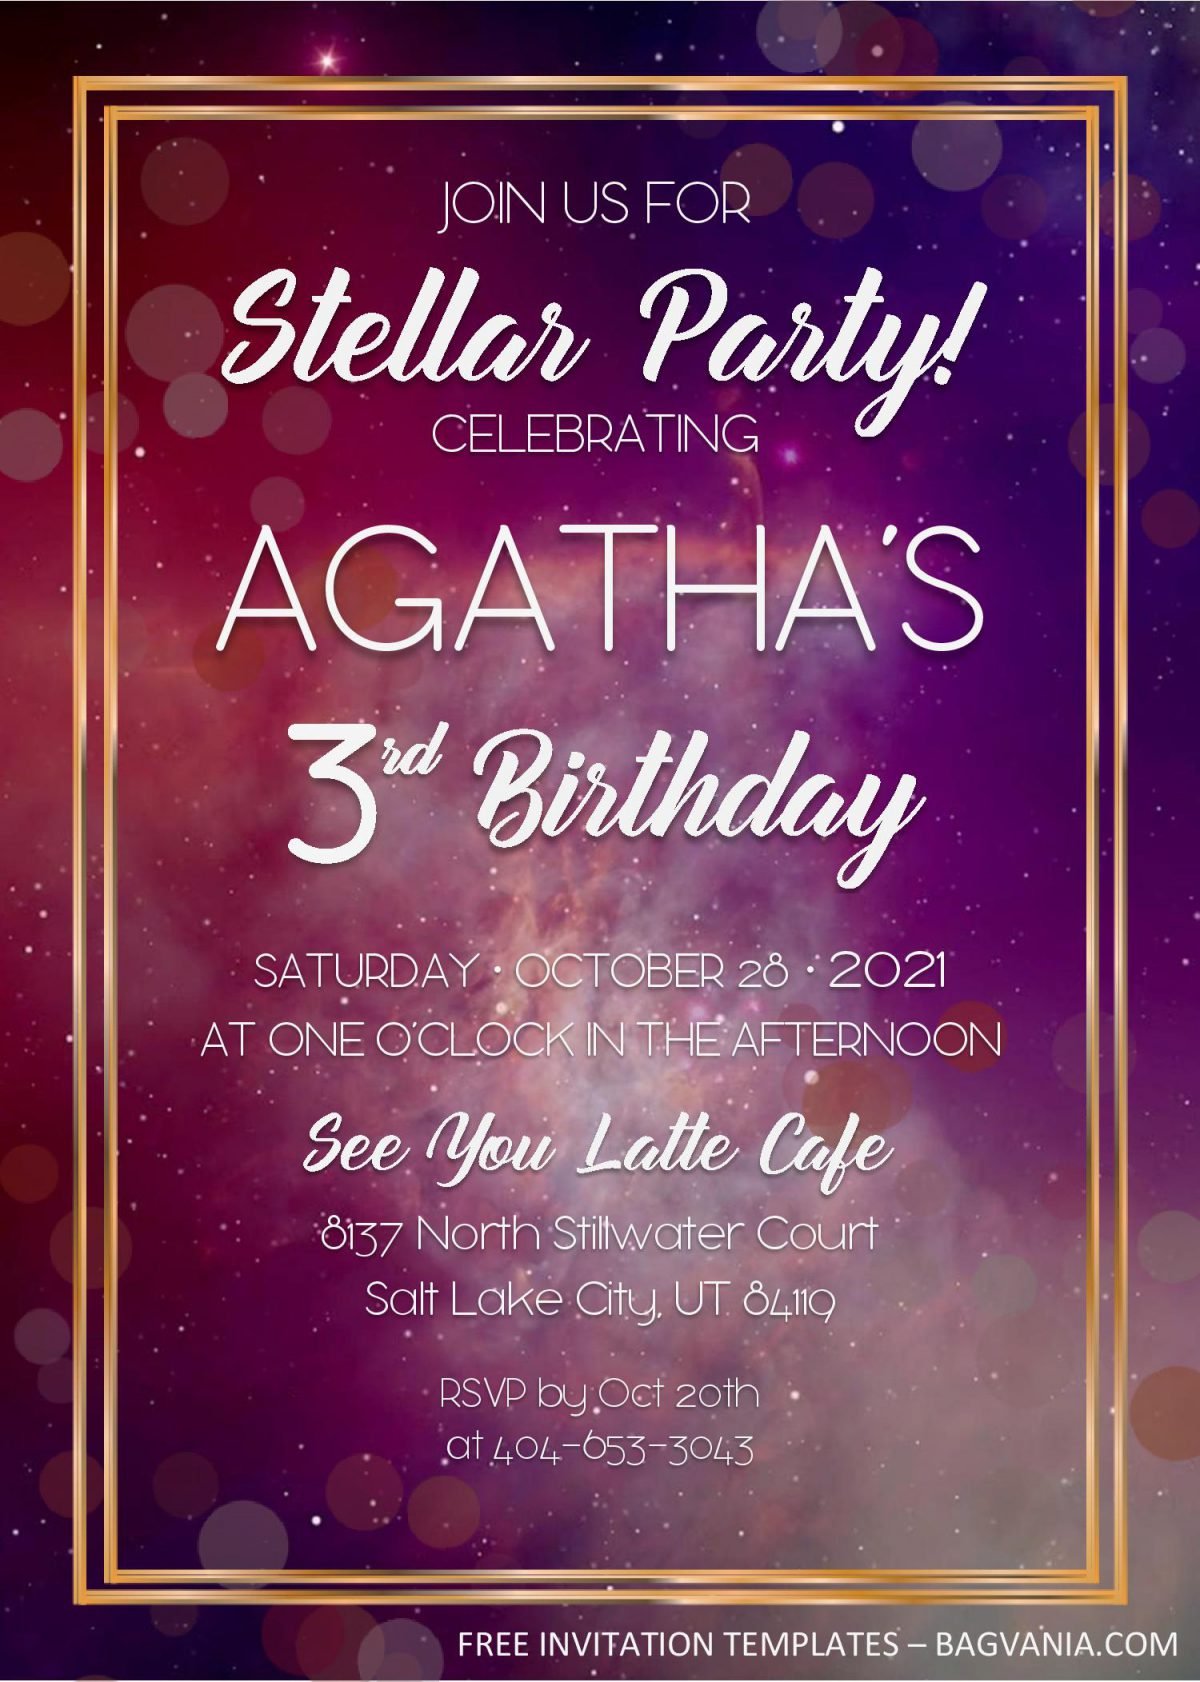 Galaxy Birthday Invitation Templates - Editable With MS Word and has gold frame